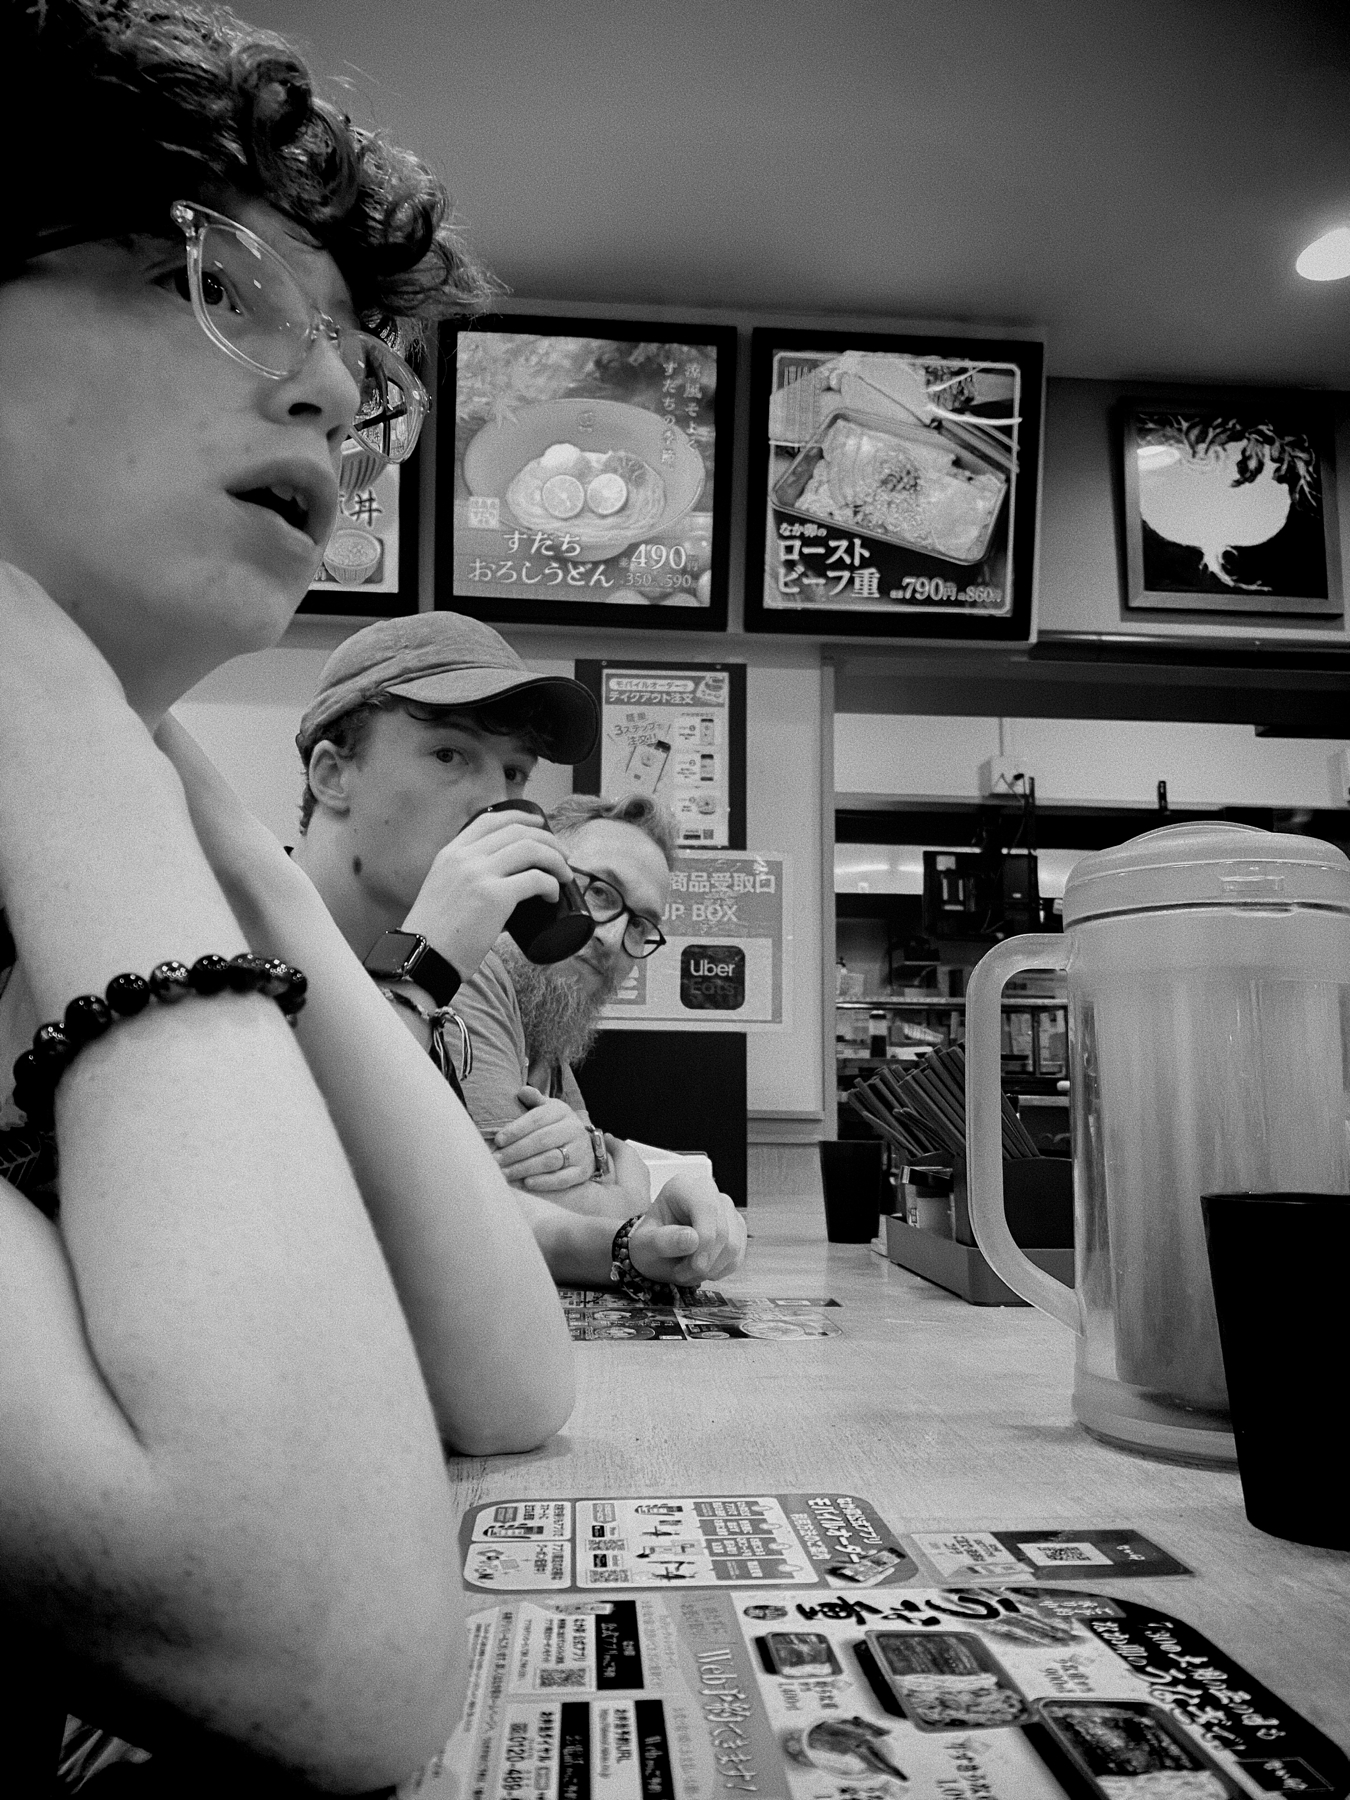 A black and white photo if us stood at the bar seating of a Japanese fast food restaurant 